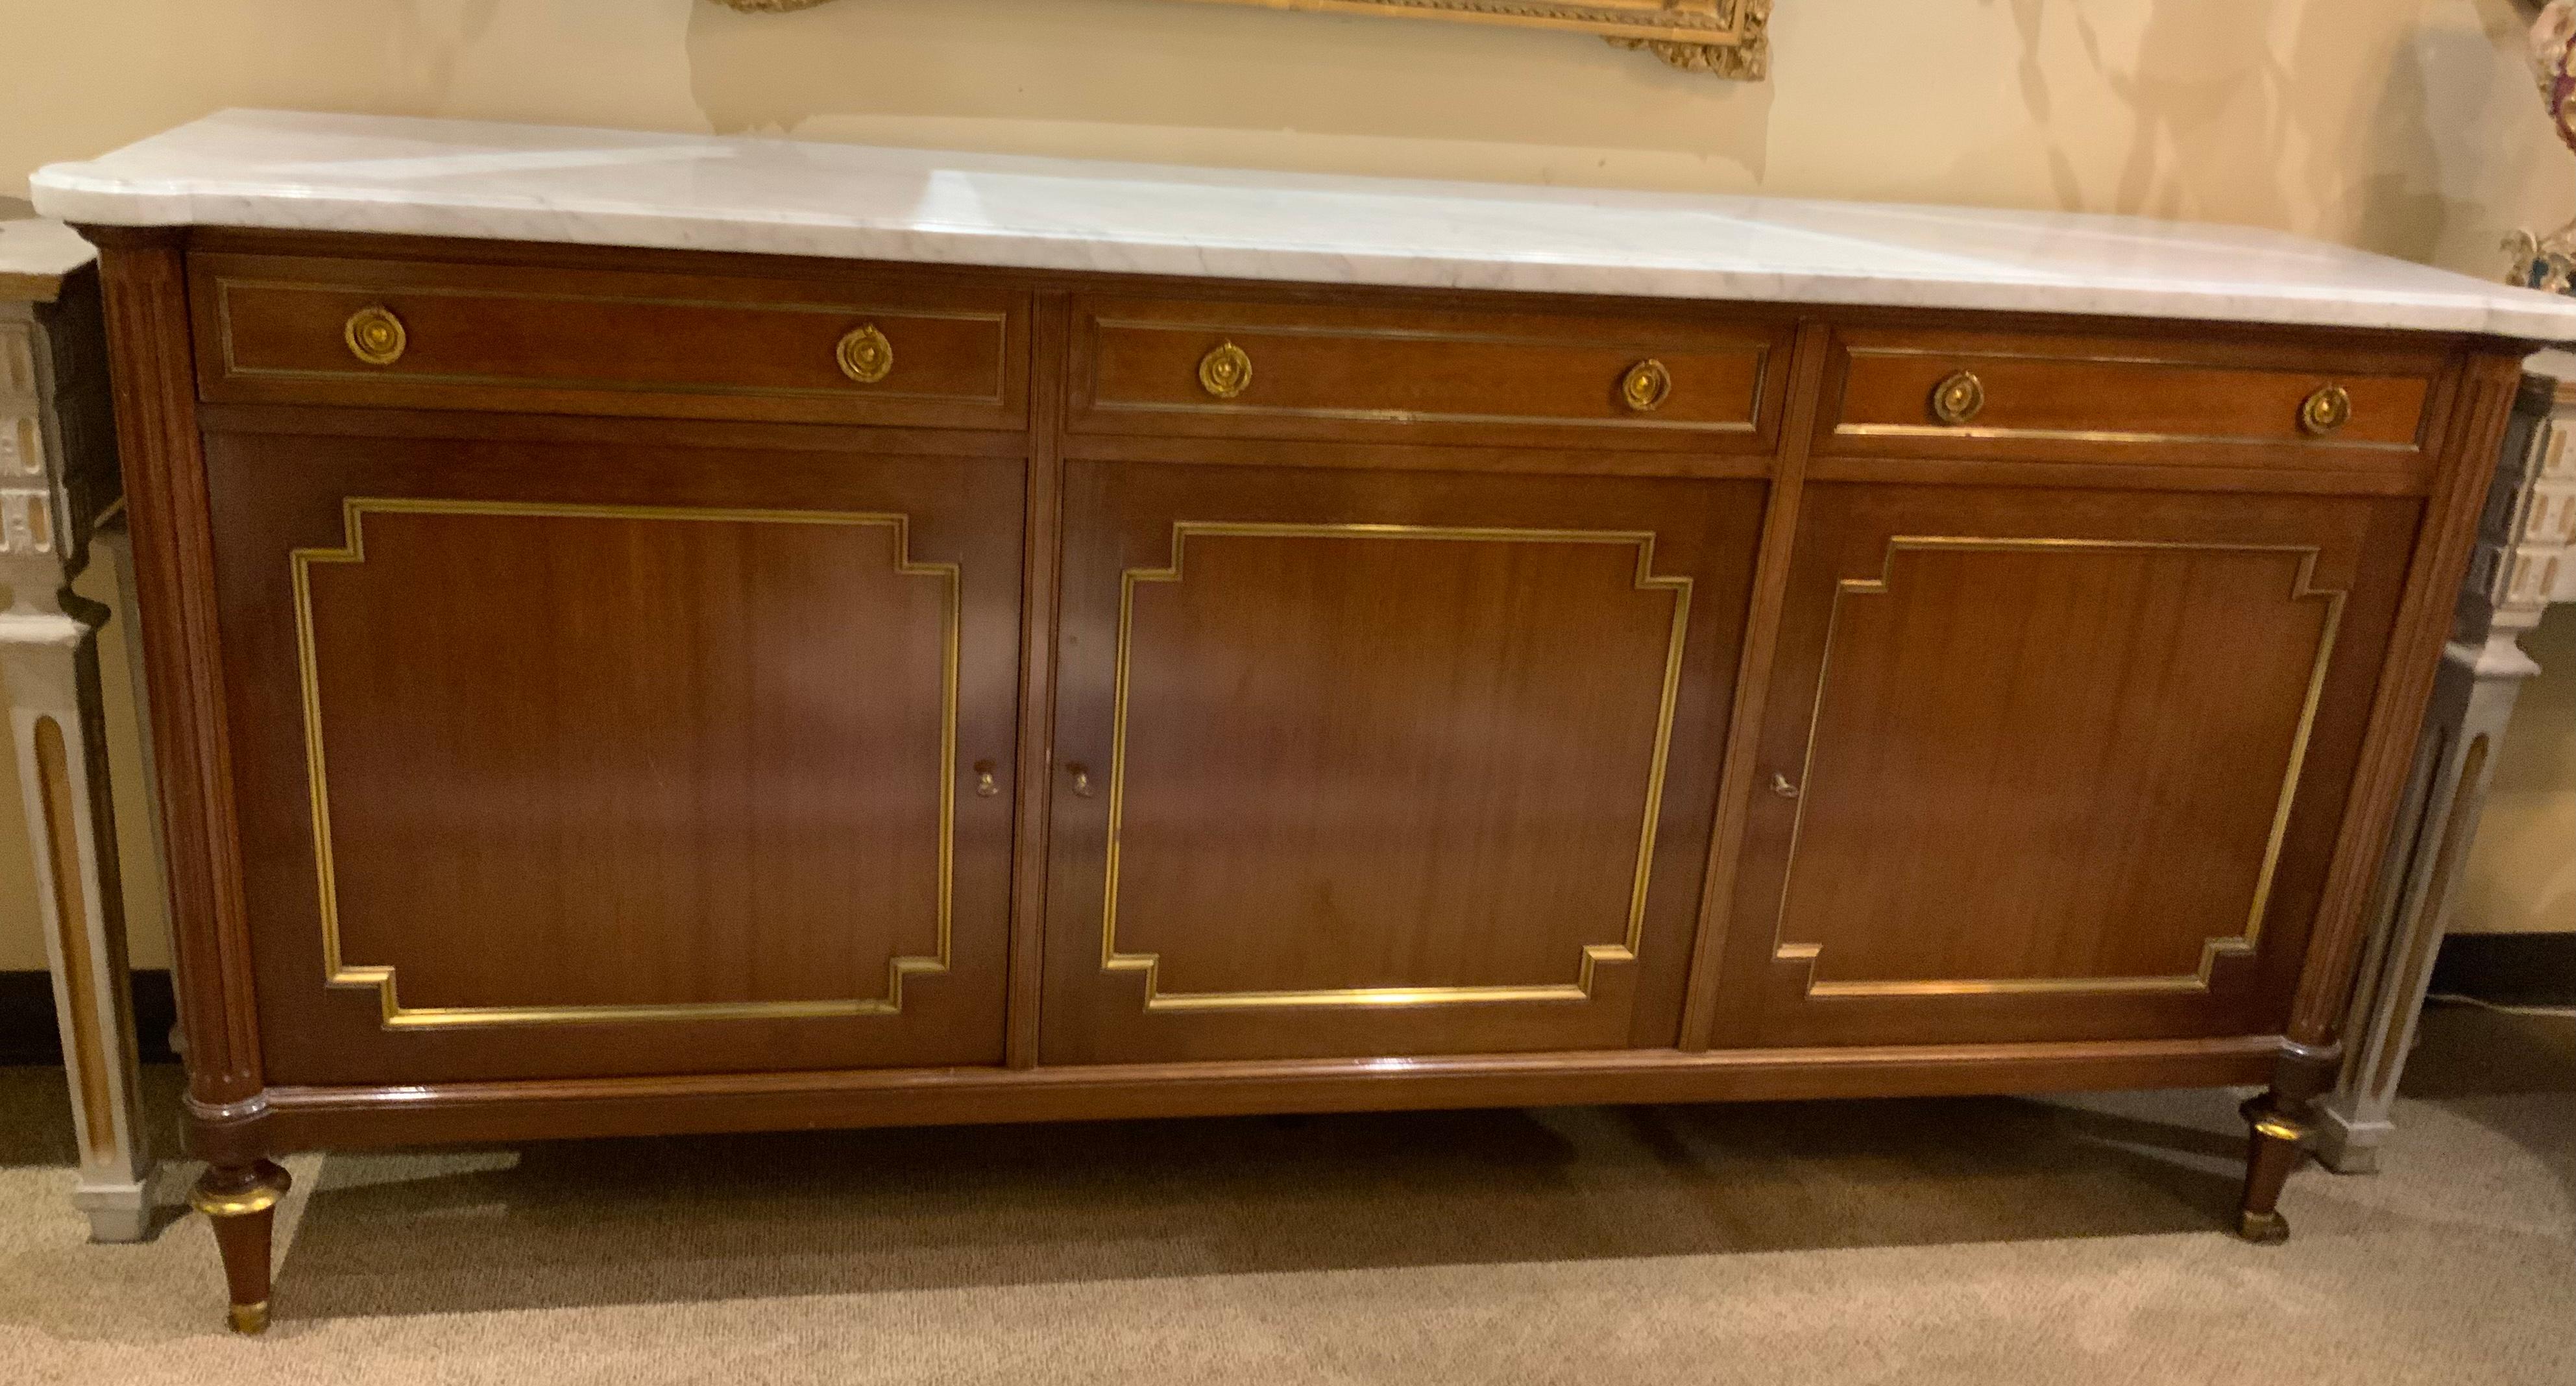 The mahogany in this piece is of the best quality and the
Workmanship in this cabinet is exceptional. All the drawers
Slide easily and the doors open and close smoothly. The
Drawers have good dove tail construction. The style is
Classic in the